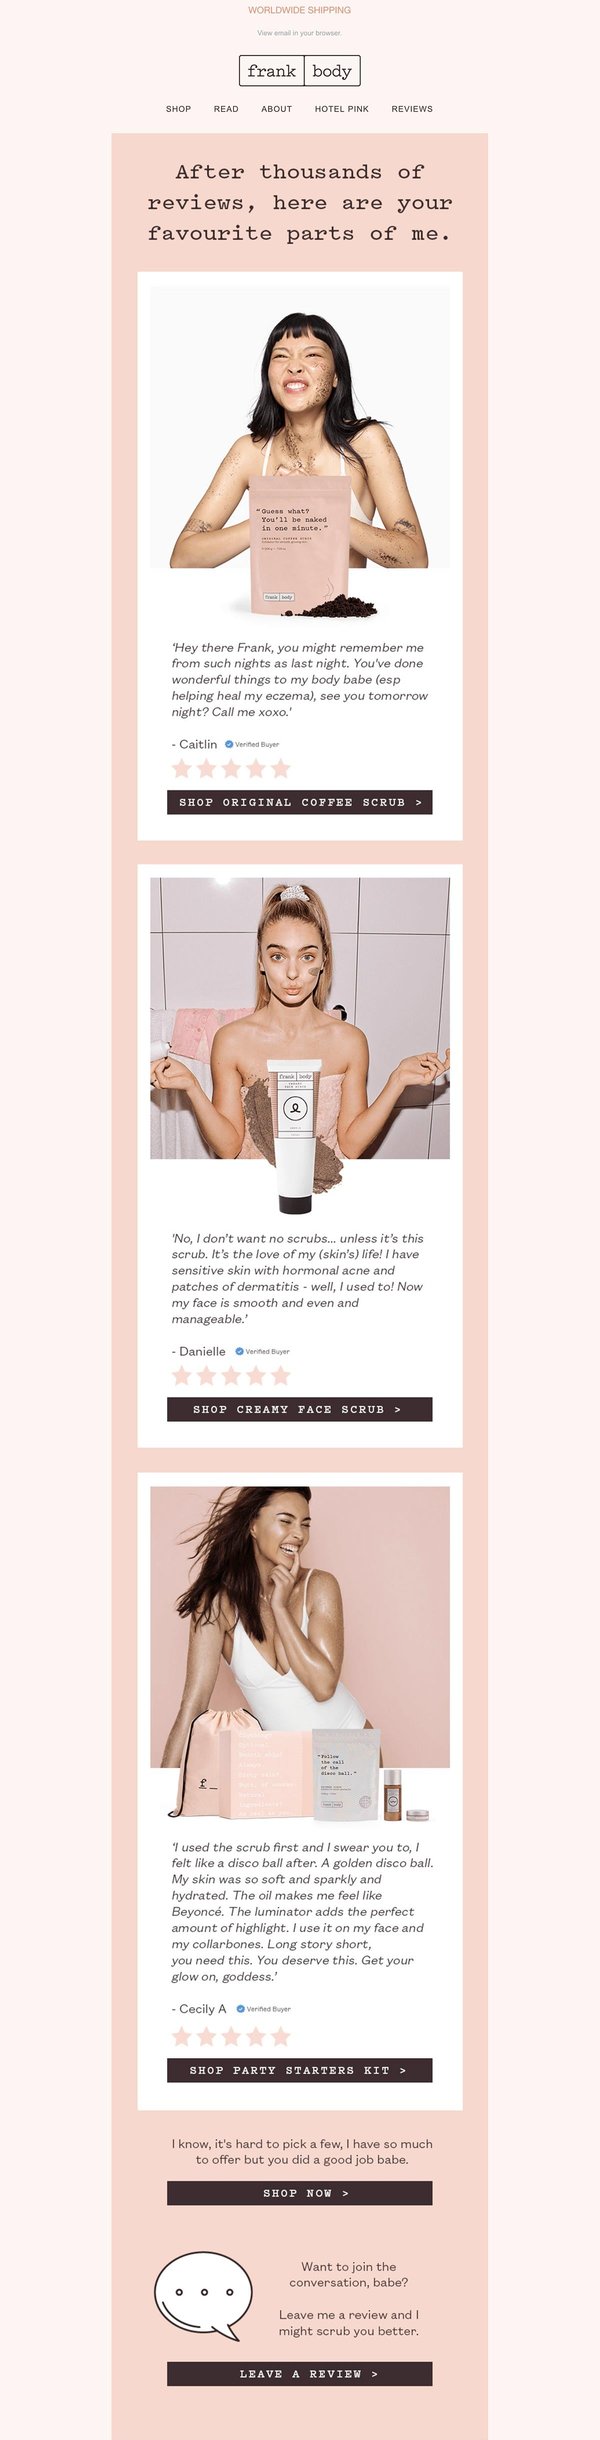 Frank Body uses customer photos and testimonials to promote products